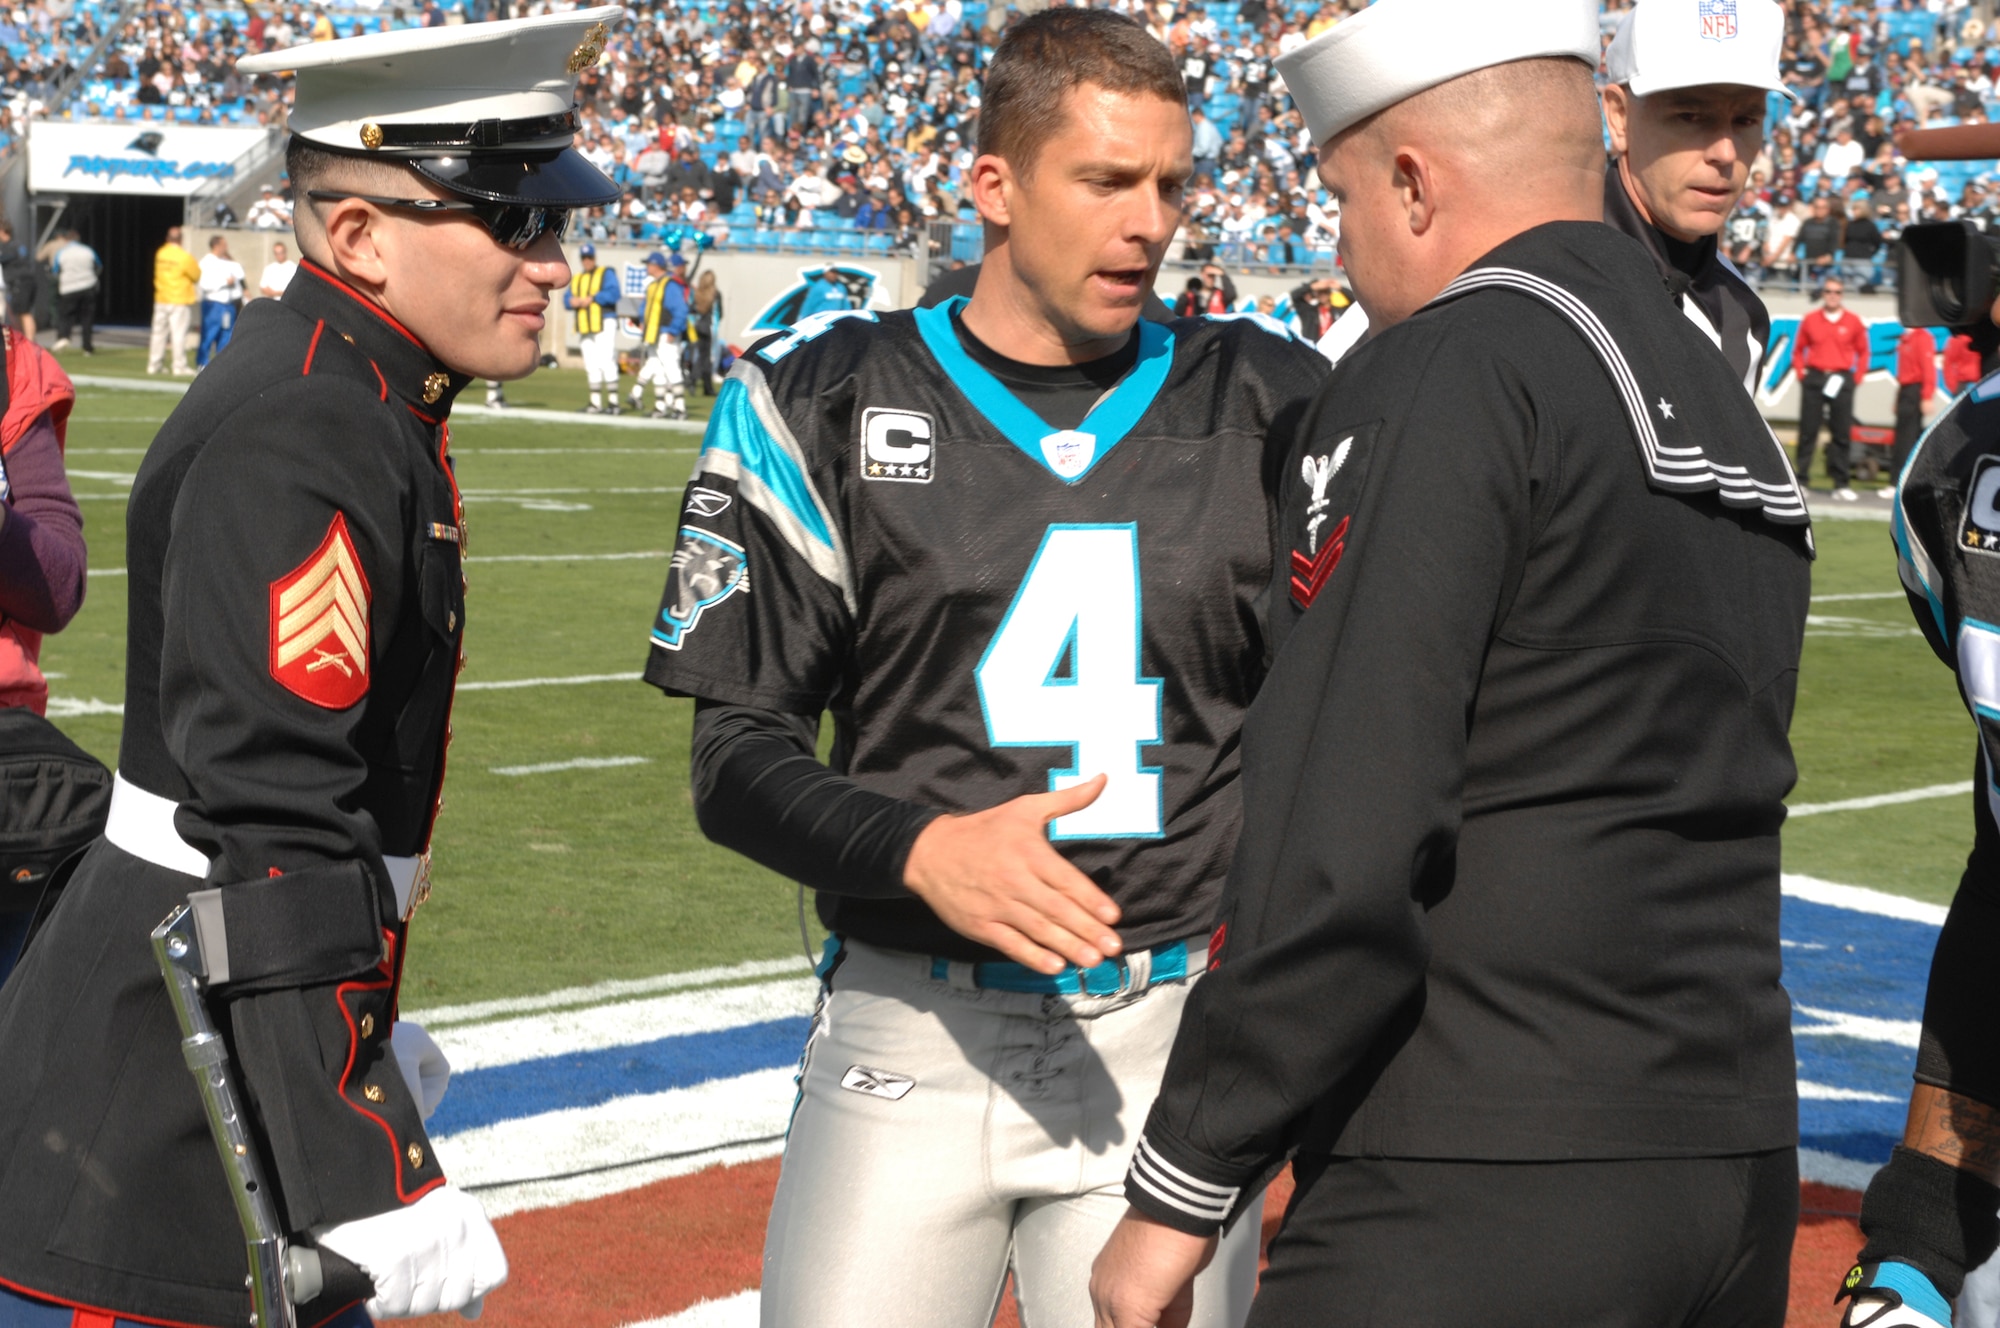 CHARLOTTE, N.C. -- Carolina Panthers kicker, John Kasay, shakes hands at mid-field with Navy Hospital Corpsman William Cooper and Marine Sgt. Edwin Bono Nov. 11. Bono and Cooper, injured in Iraq, were named honorary team captains in honor of Veterans Day. (U.S. Air Force photo/Staff Sgt. Henry Hoegen)